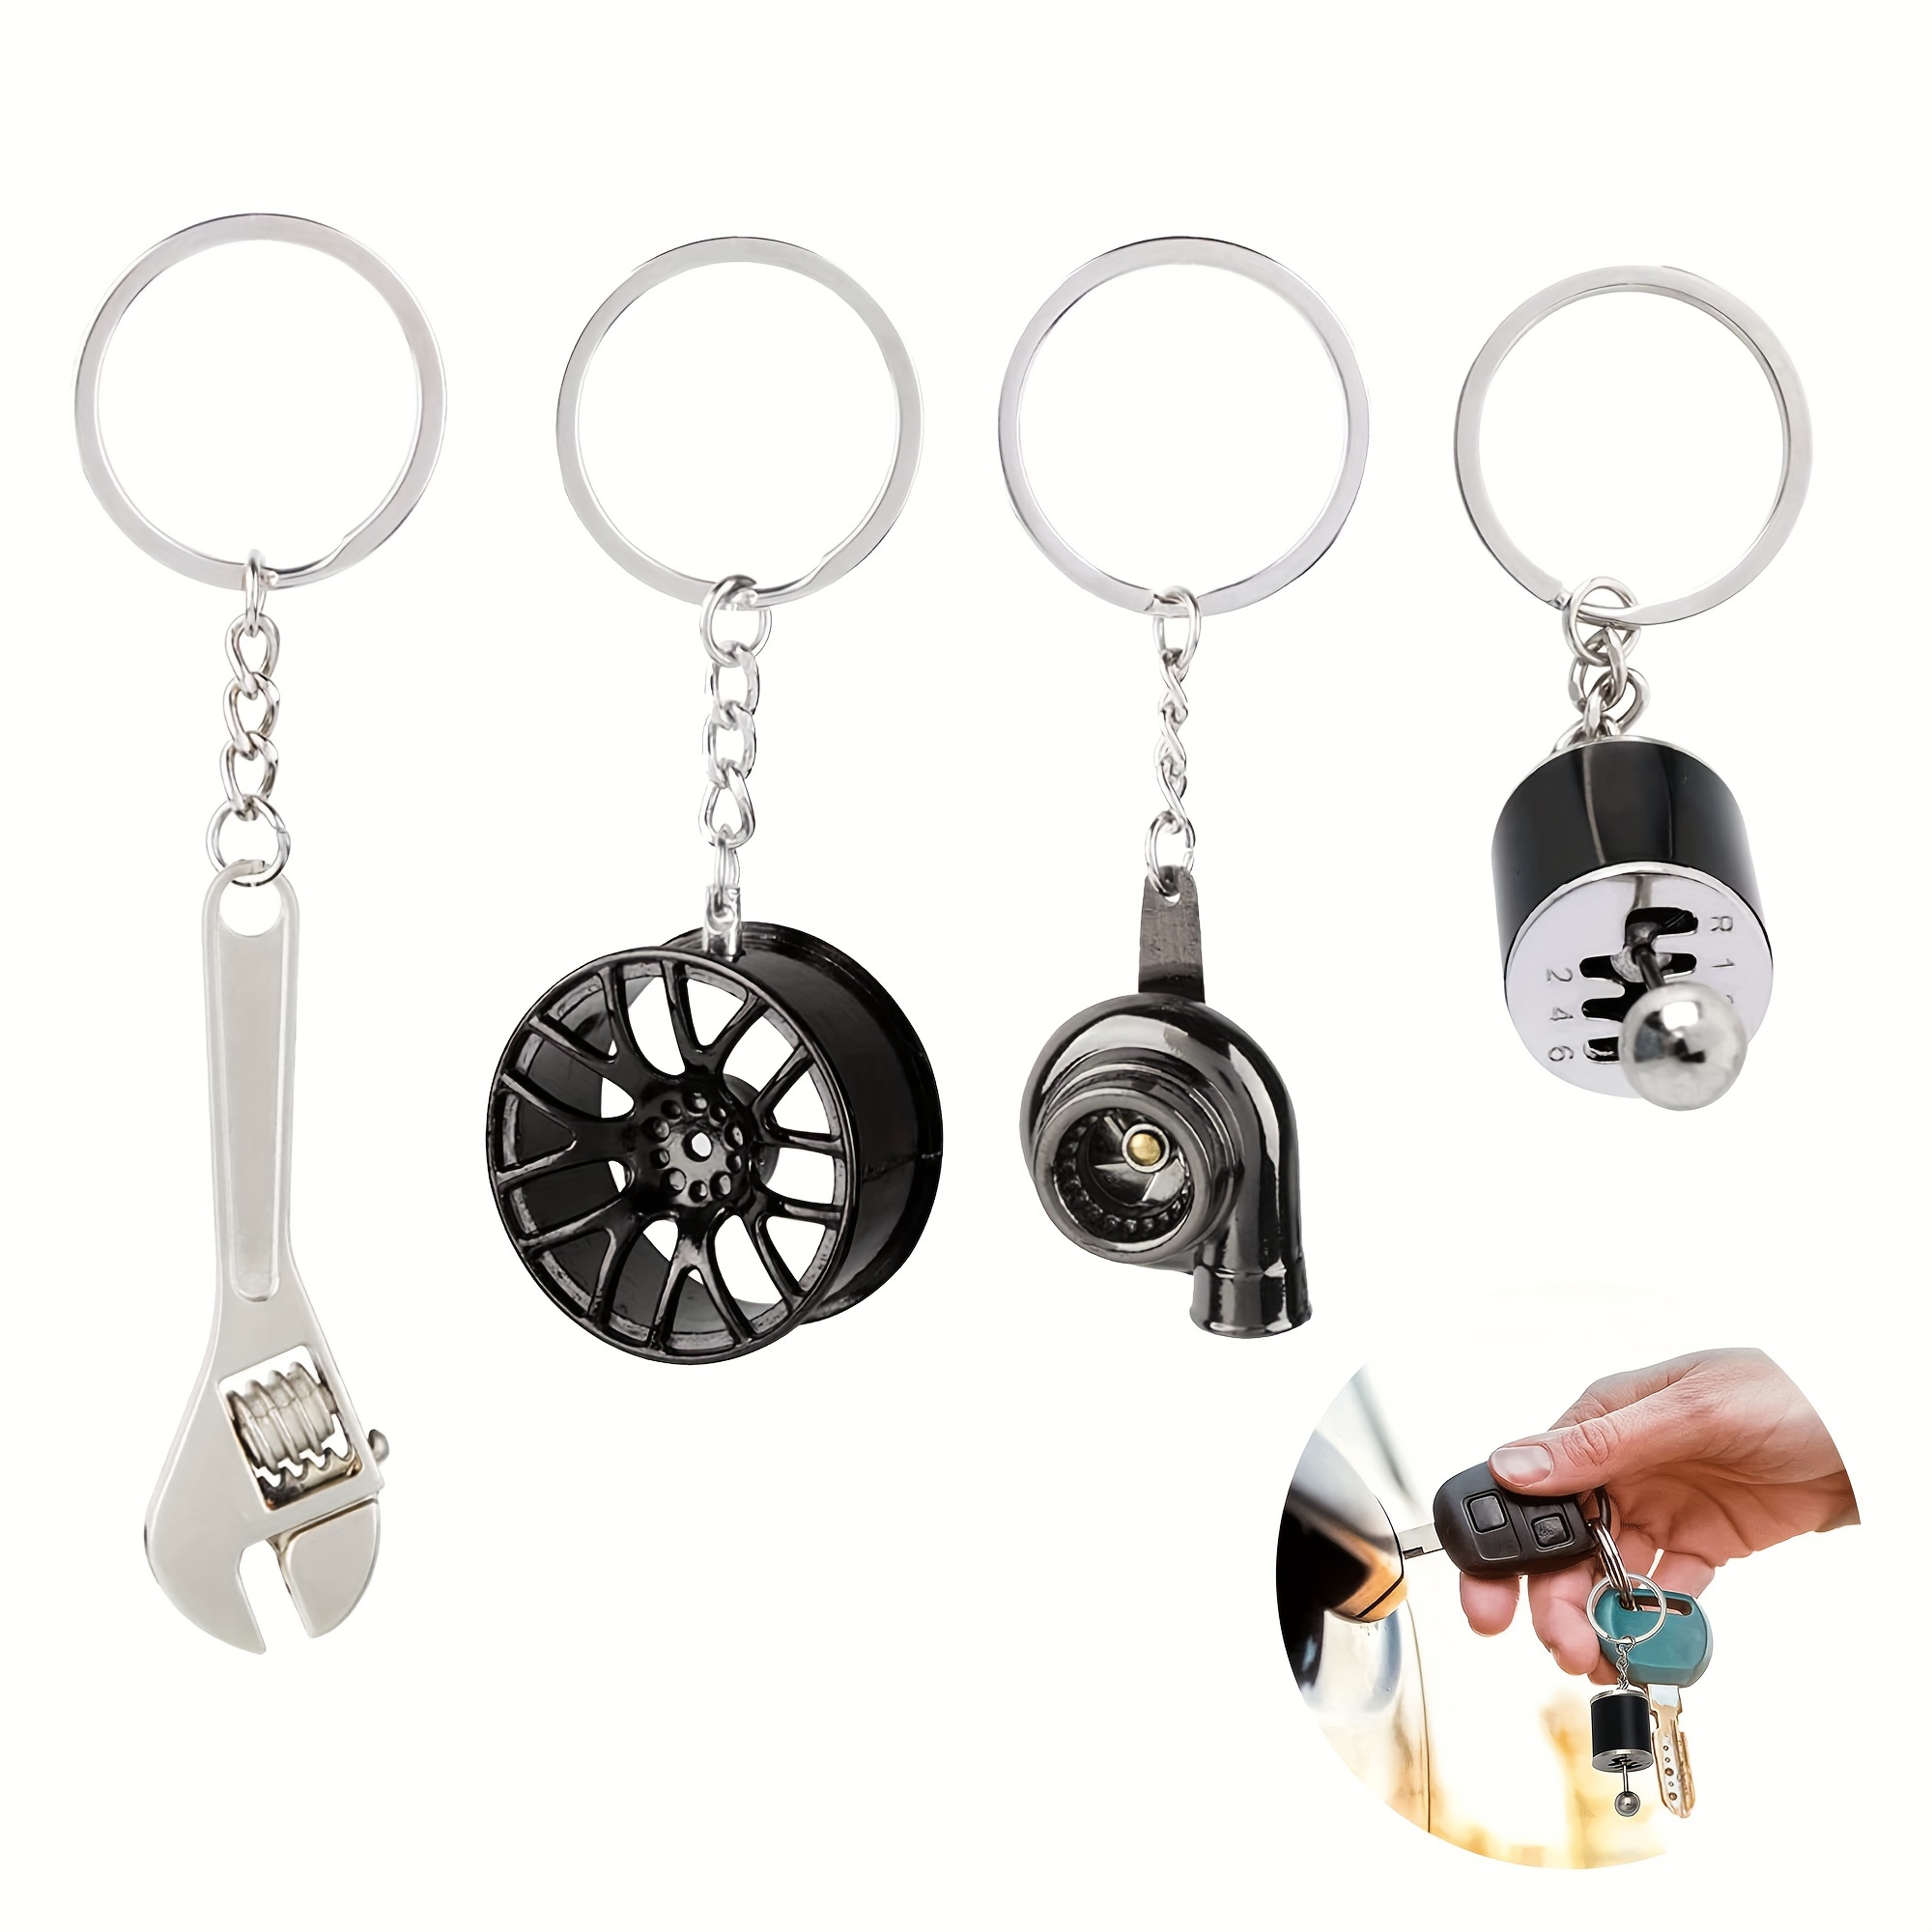 

4pcs Car Keyring Set Delicate Turbo Keychain Gift For Christmas Birthdays Graduation For Car Enthusiasts Use For Car Keys Motorbike Keychains Bag Pendants Wallets Provides A Stylish Look